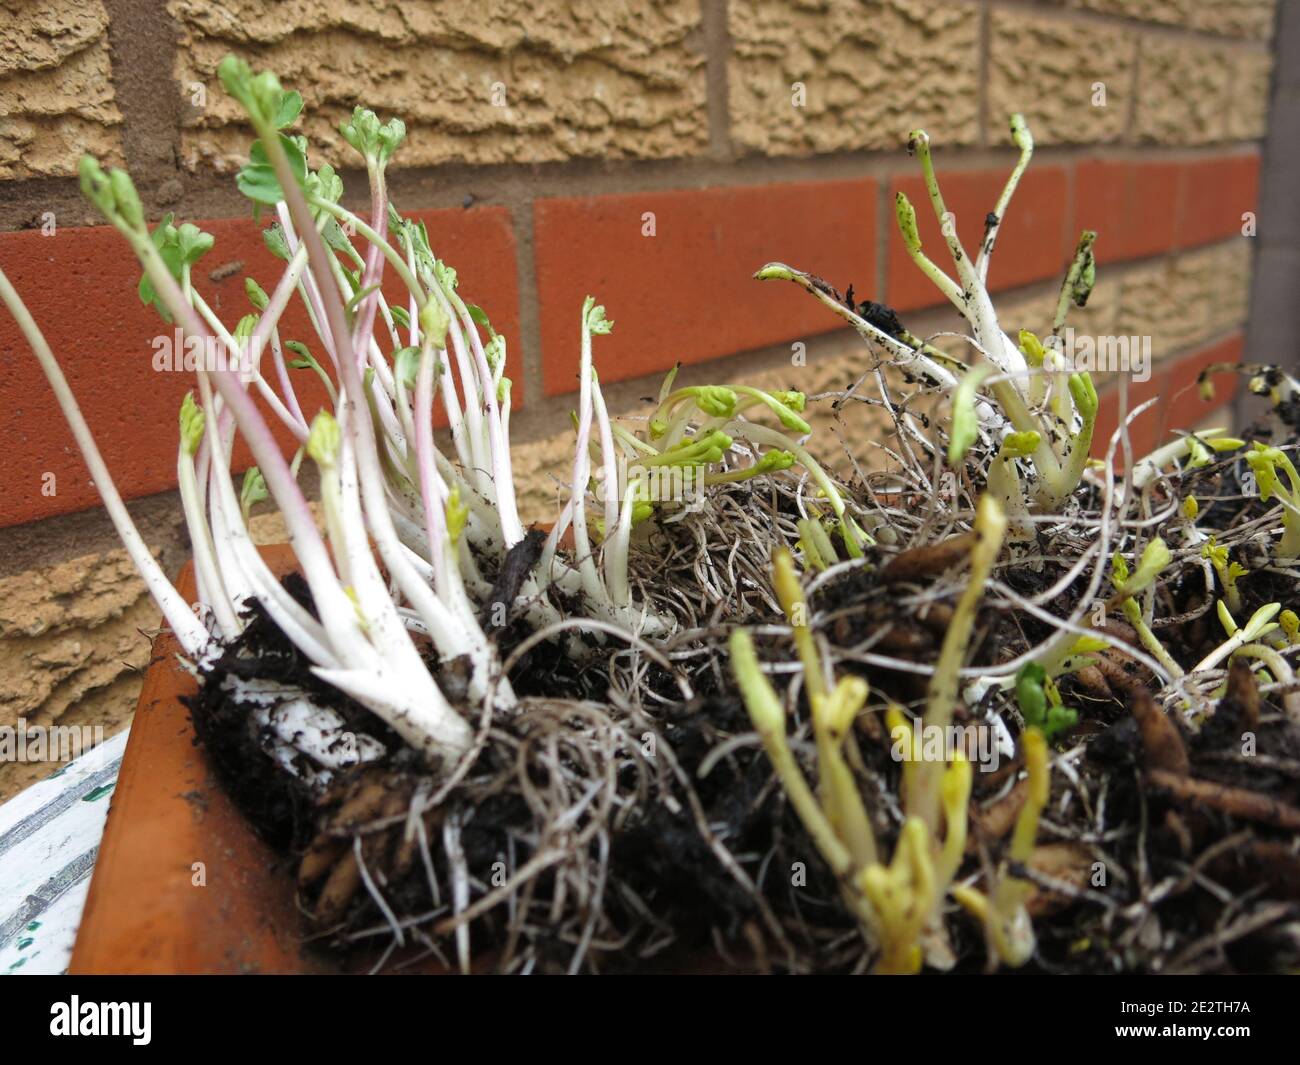 Spring-time planting in the green; close-up of a tray of ranunculus corms with shooting tips and fibrous roots, ready for planting in early spring. Stock Photo